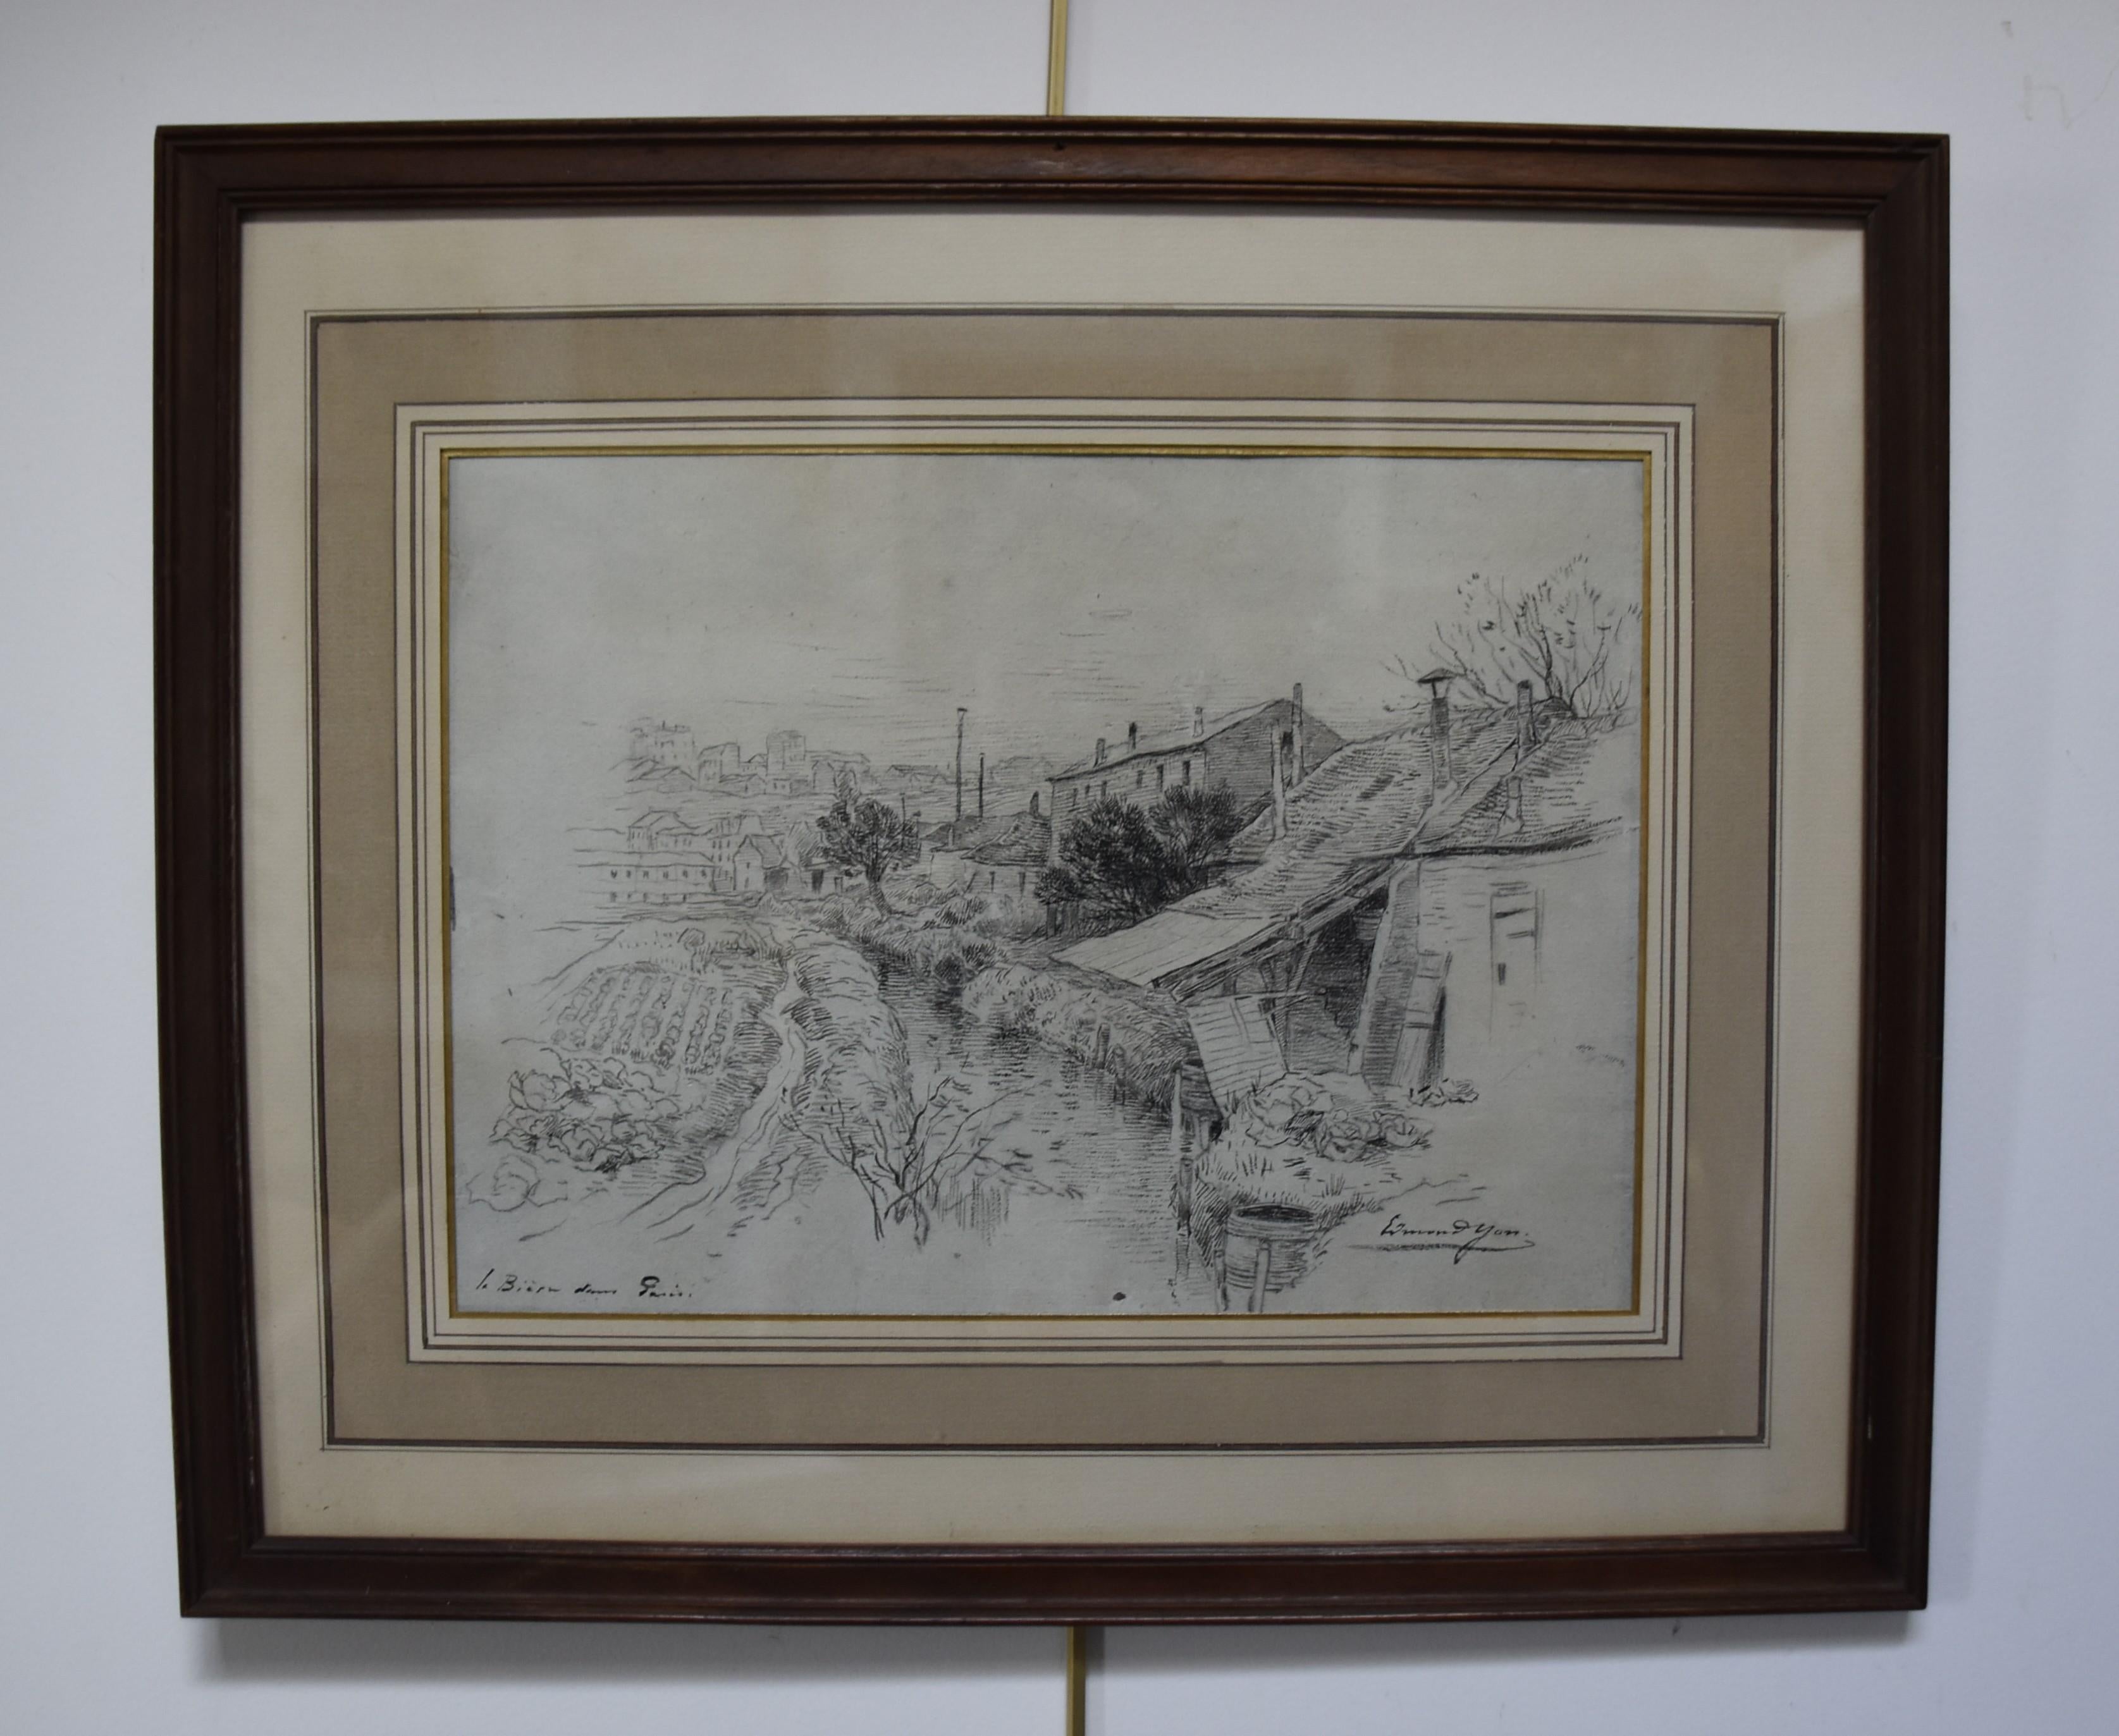 Edmond Yon (1836 - 1897) 
La Bièvre dans Paris (The River Bièvre in Paris)
Titled  on the lower left,  signed on the lower right
Pen and ink and pencil on paper
22 x  30 cm
In good condition 
Framed  :  38 x 45.3  cm (a very small hole in the middle